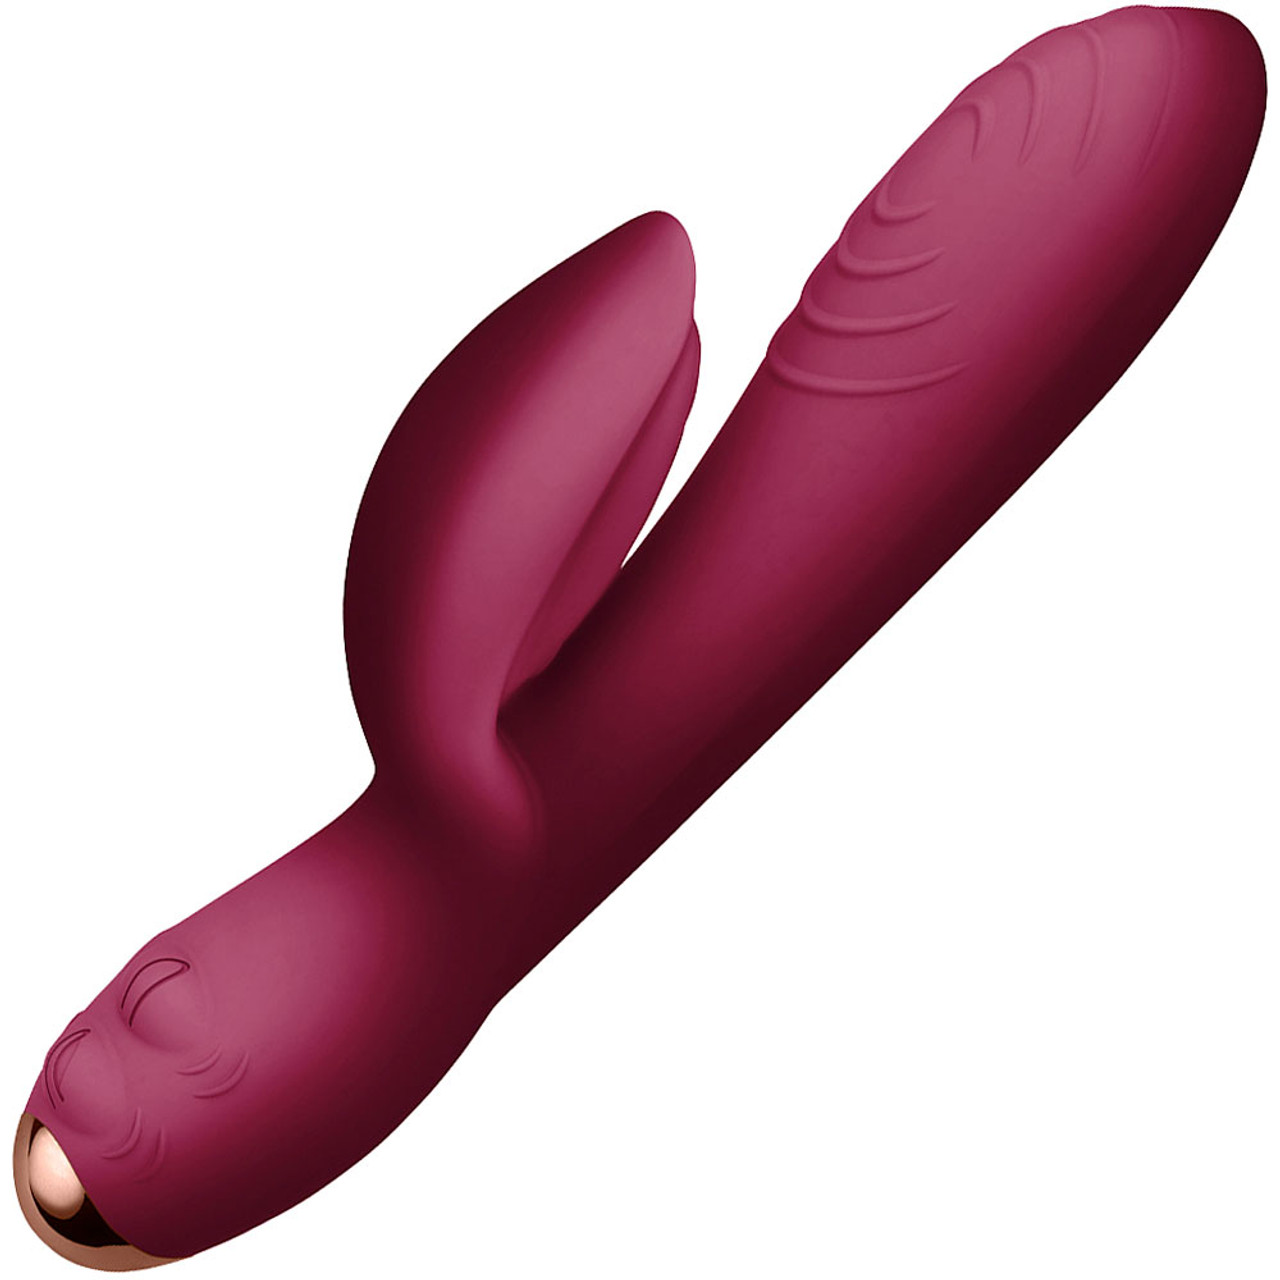 EveryGirl 10 Function Rechargeable Waterproof Vibrating Rabbit Style Vibrator By Rocks-Off